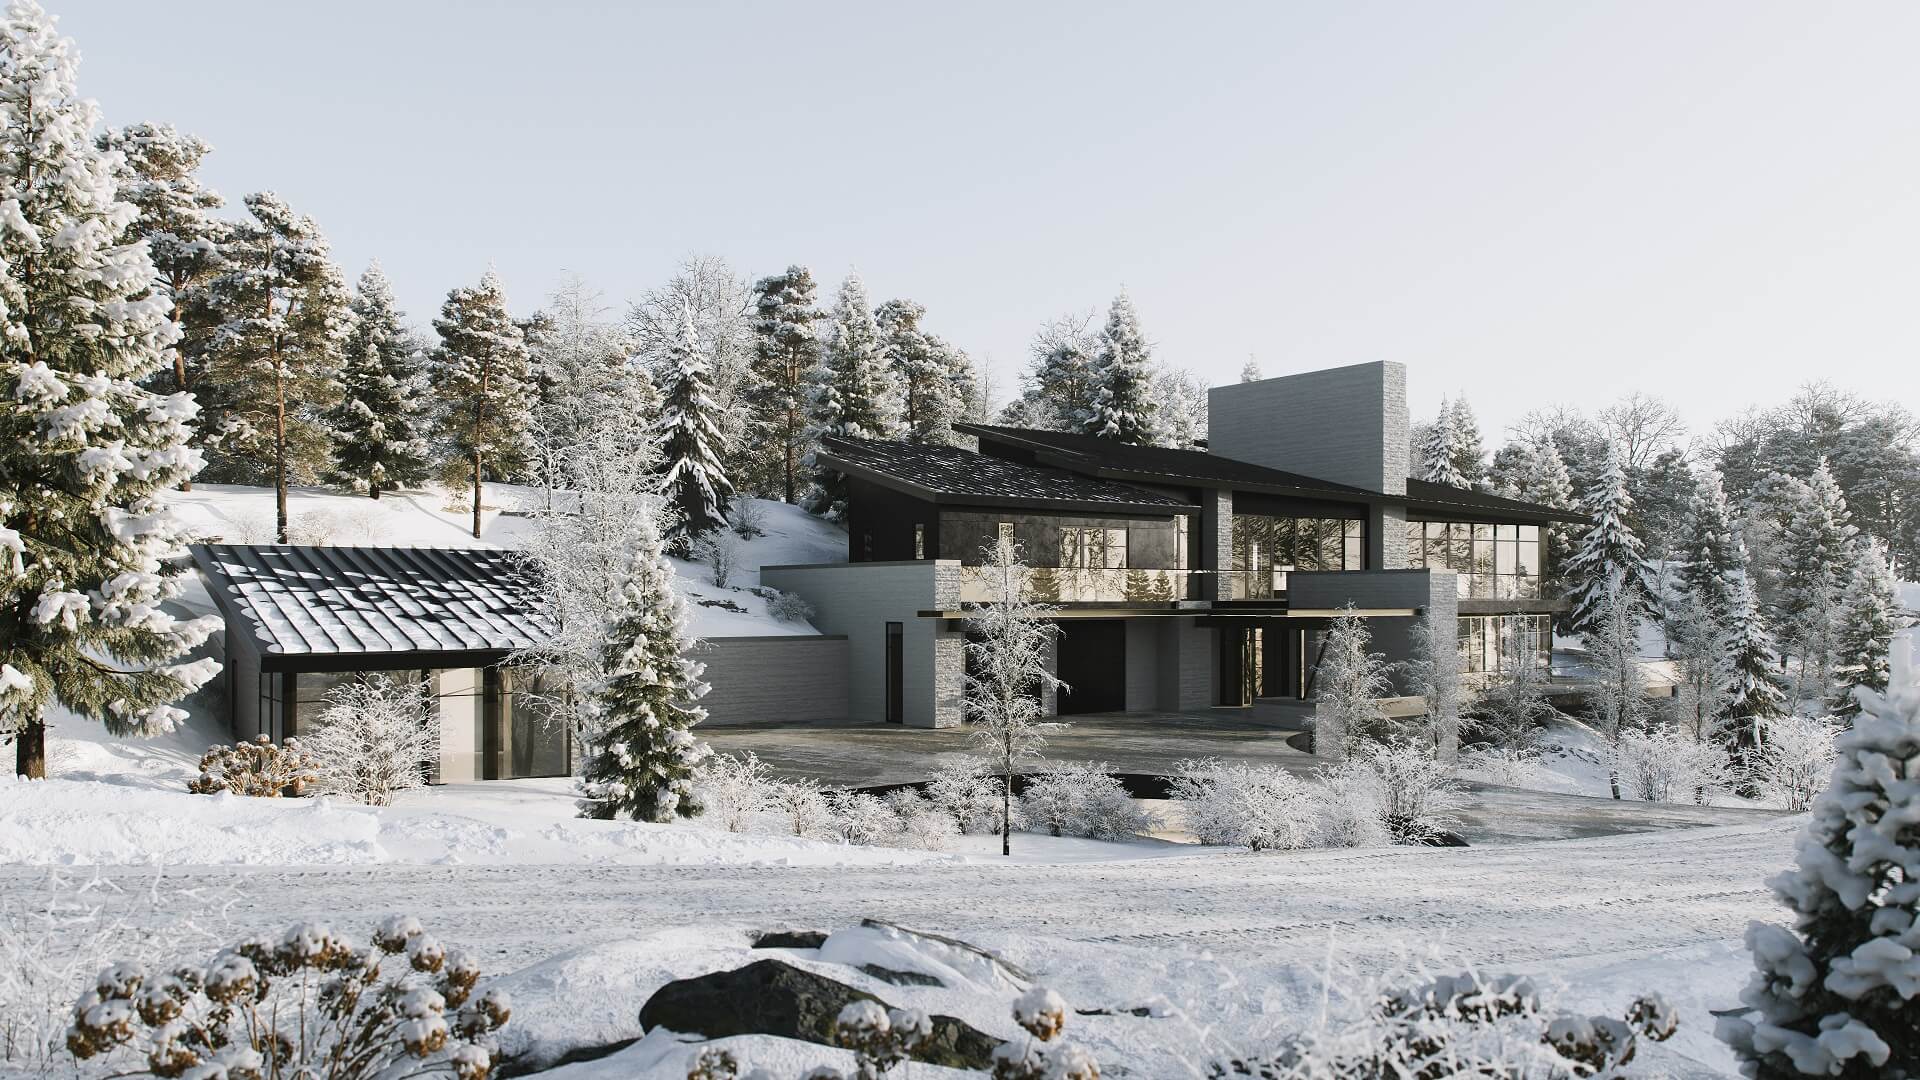 3D Exterior Visualization for a House in Winter